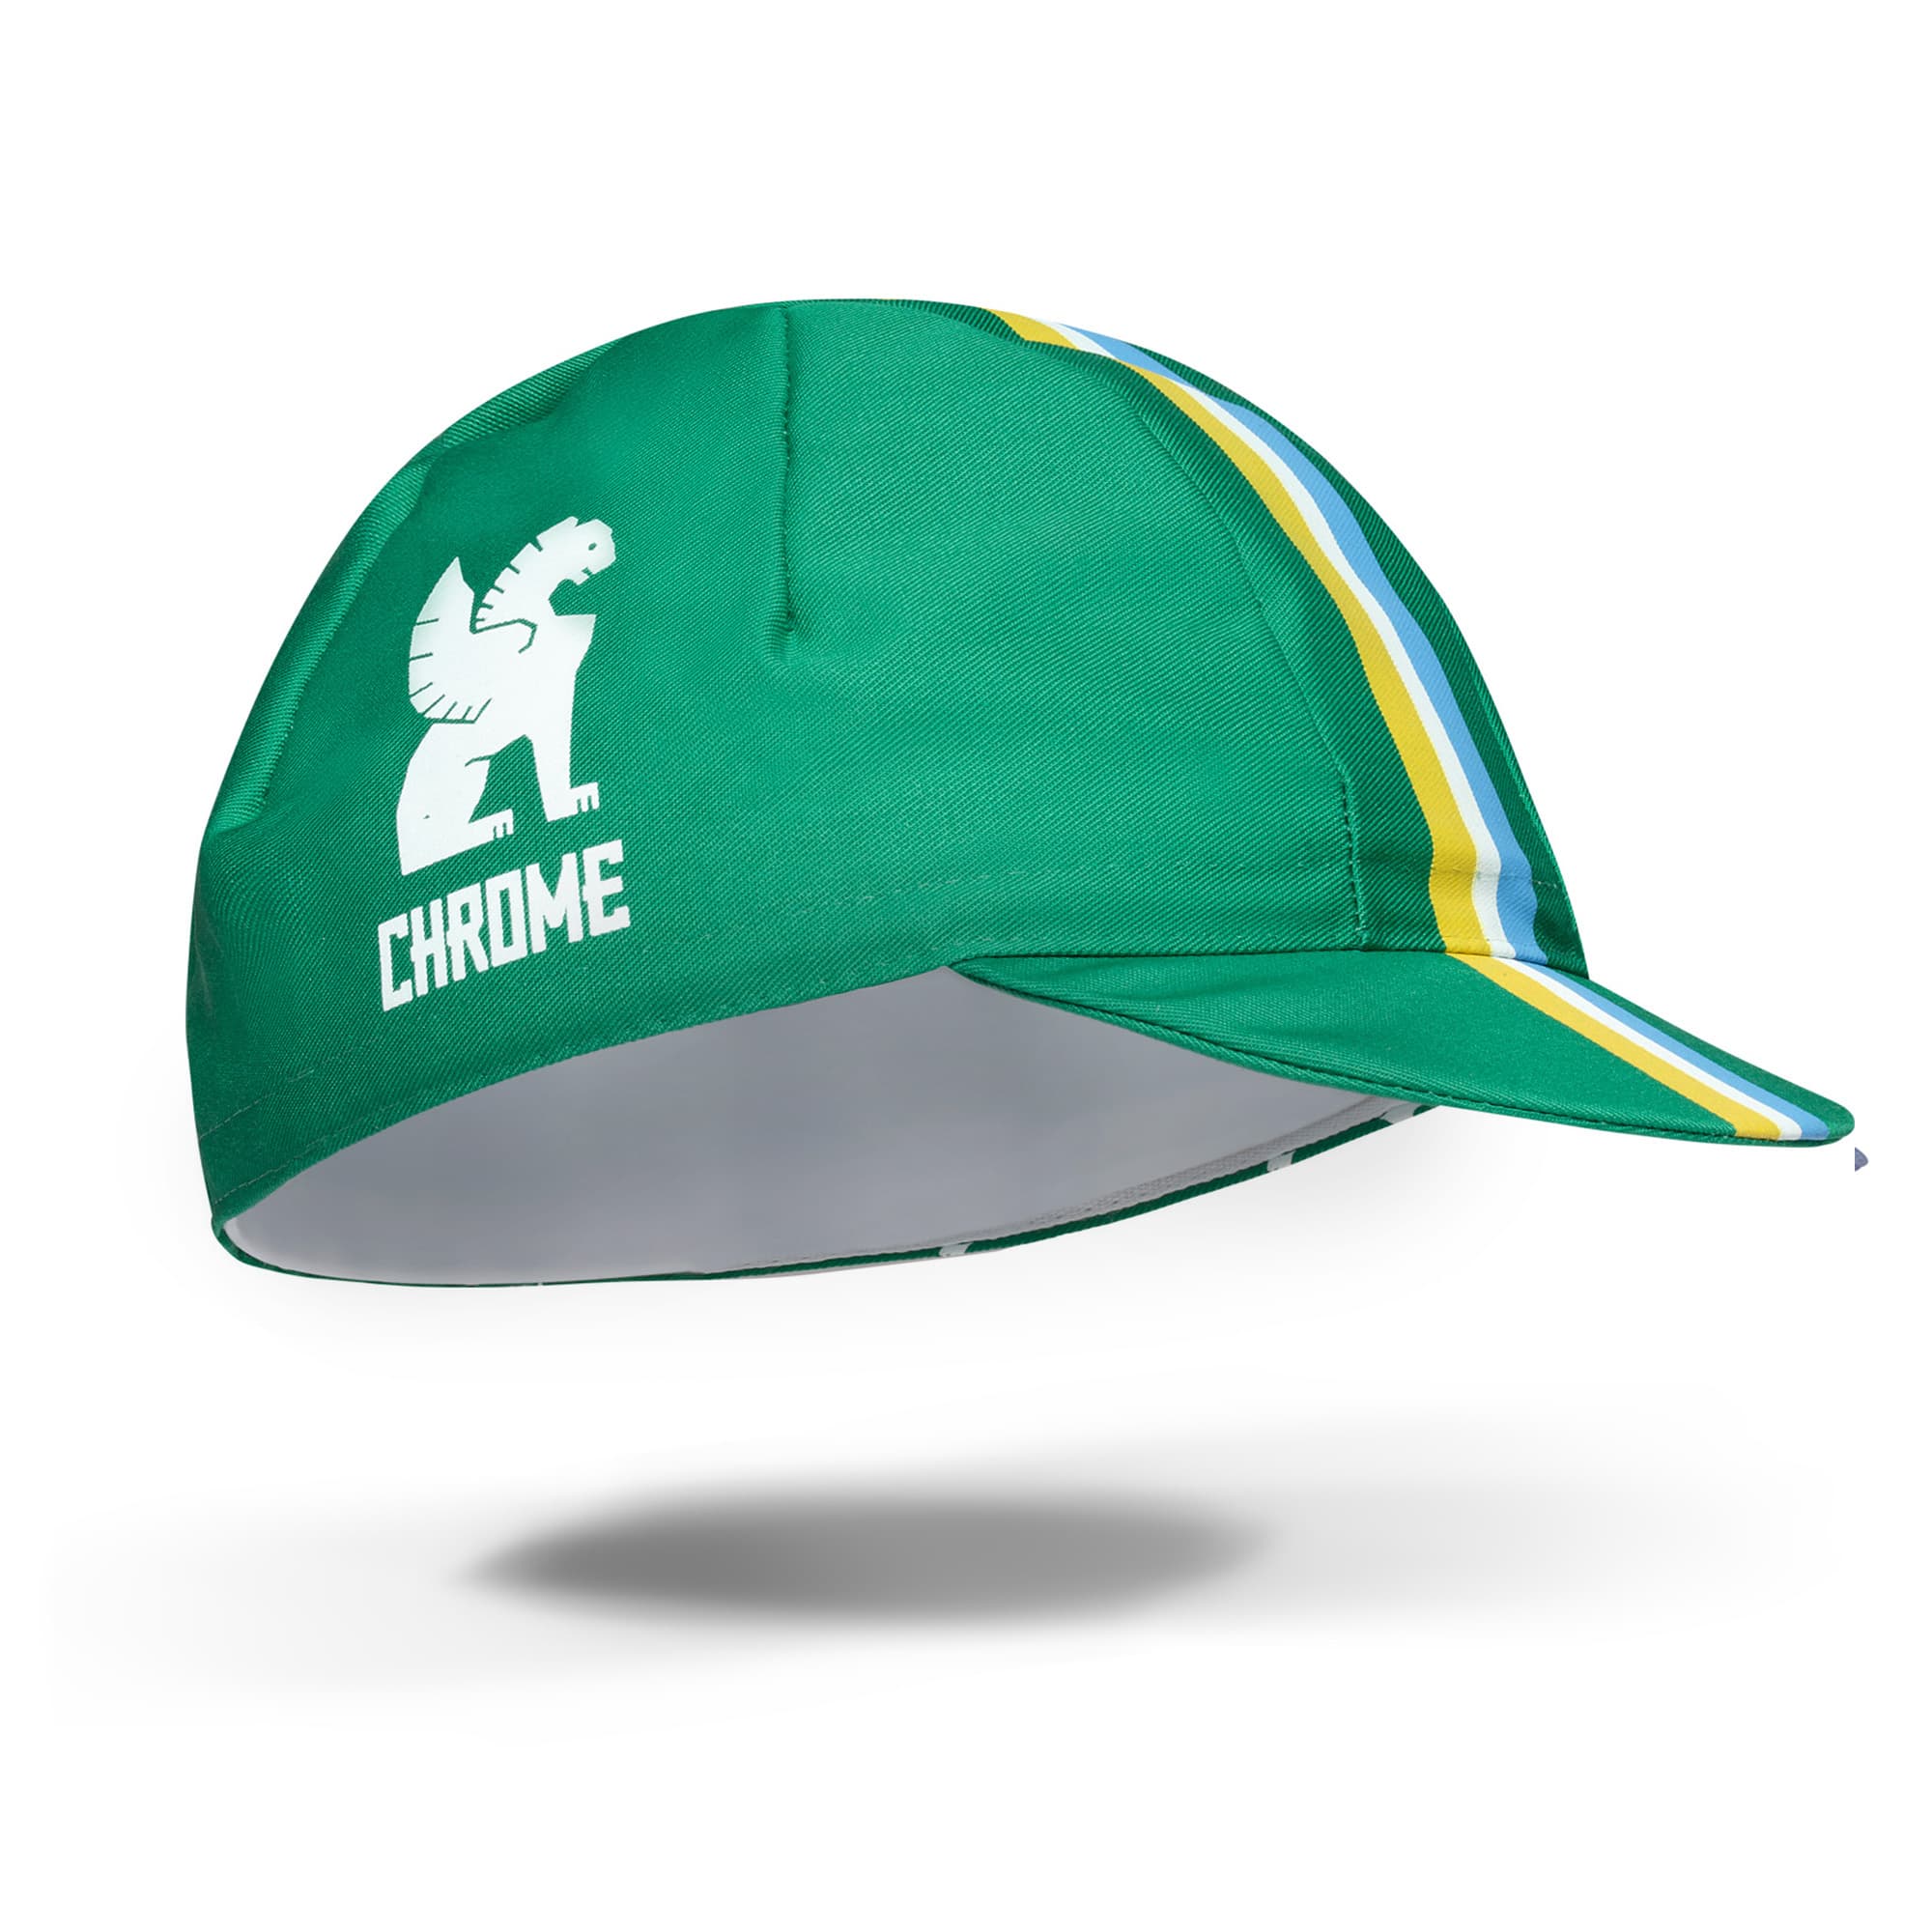 Chrome Portland Rides Cycling Cap in green front view #color_portland stumptown